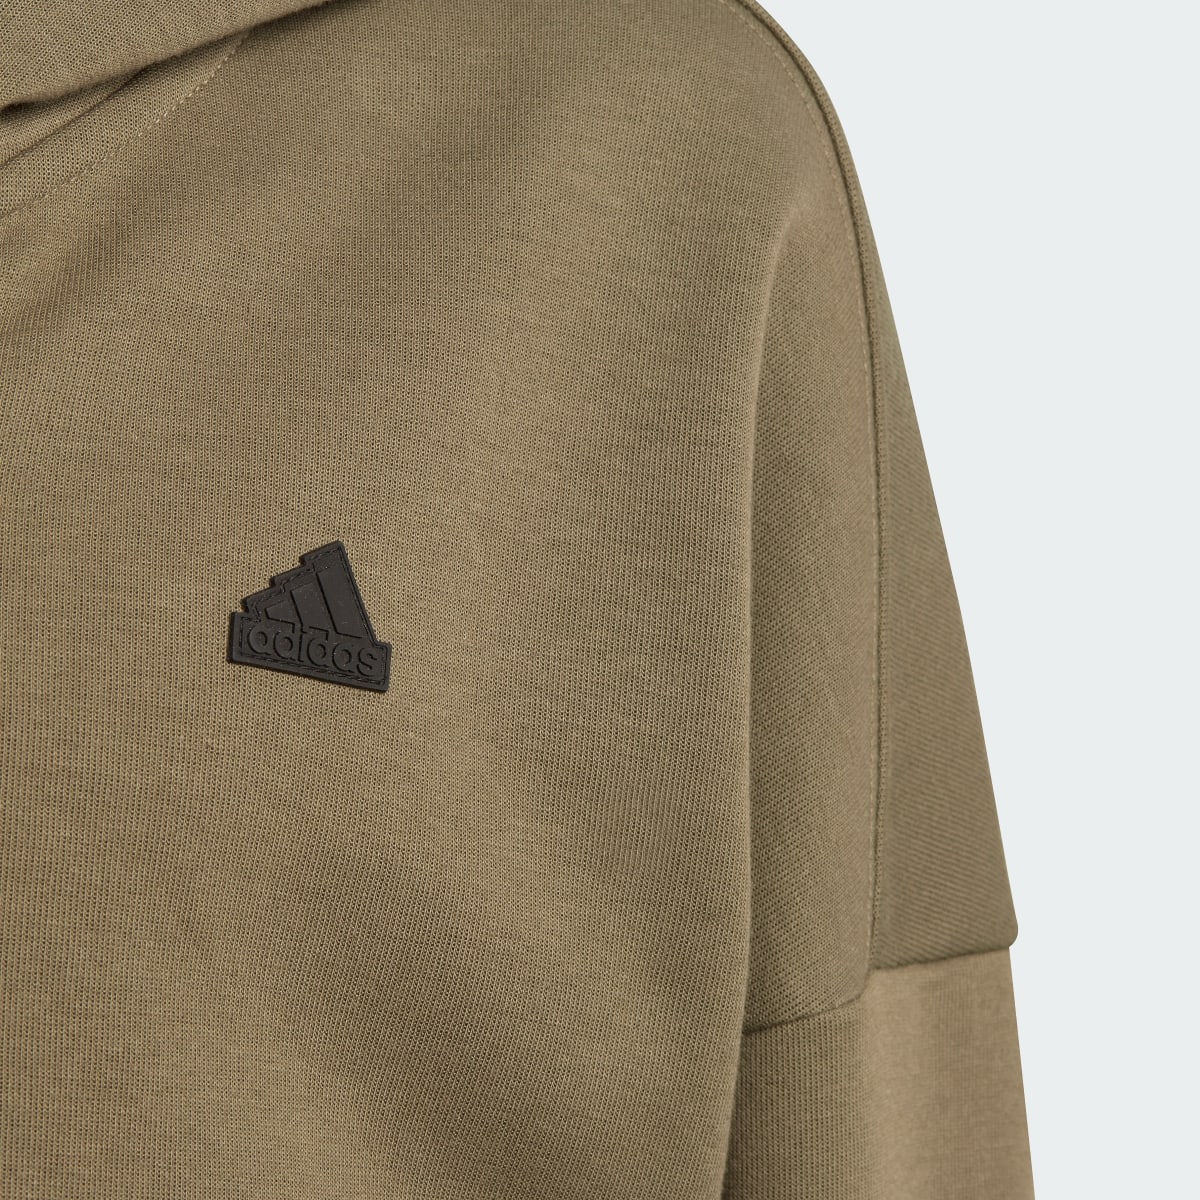 Adidas Future Icons 3-Stripes Full-Zip Hooded Track Top. 7